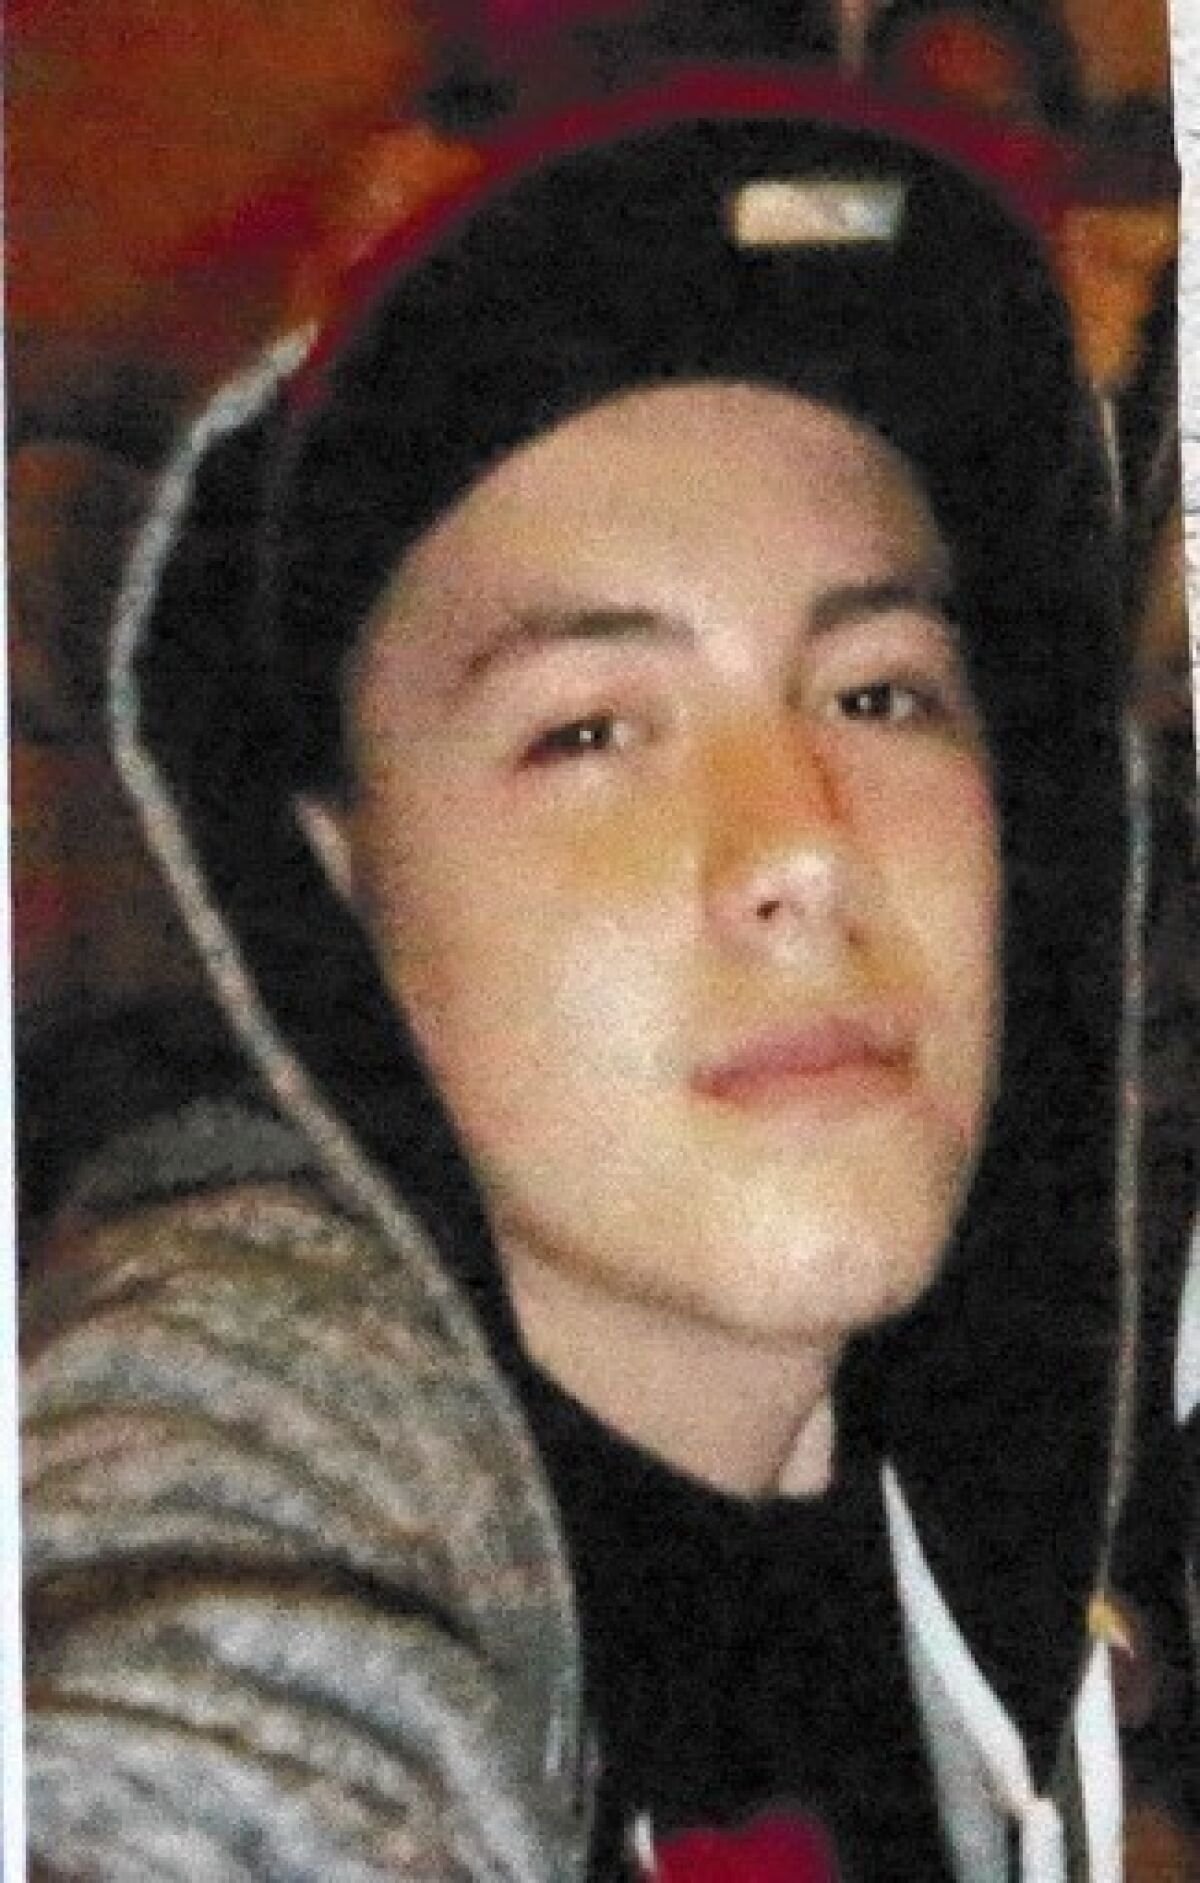 Cristopher Rossi, 16, was shot to death outside his home on Huntington Drive in Duarte late Monday. Authorities in nearby Monrovia are stepping up patrols in response to the shootings.